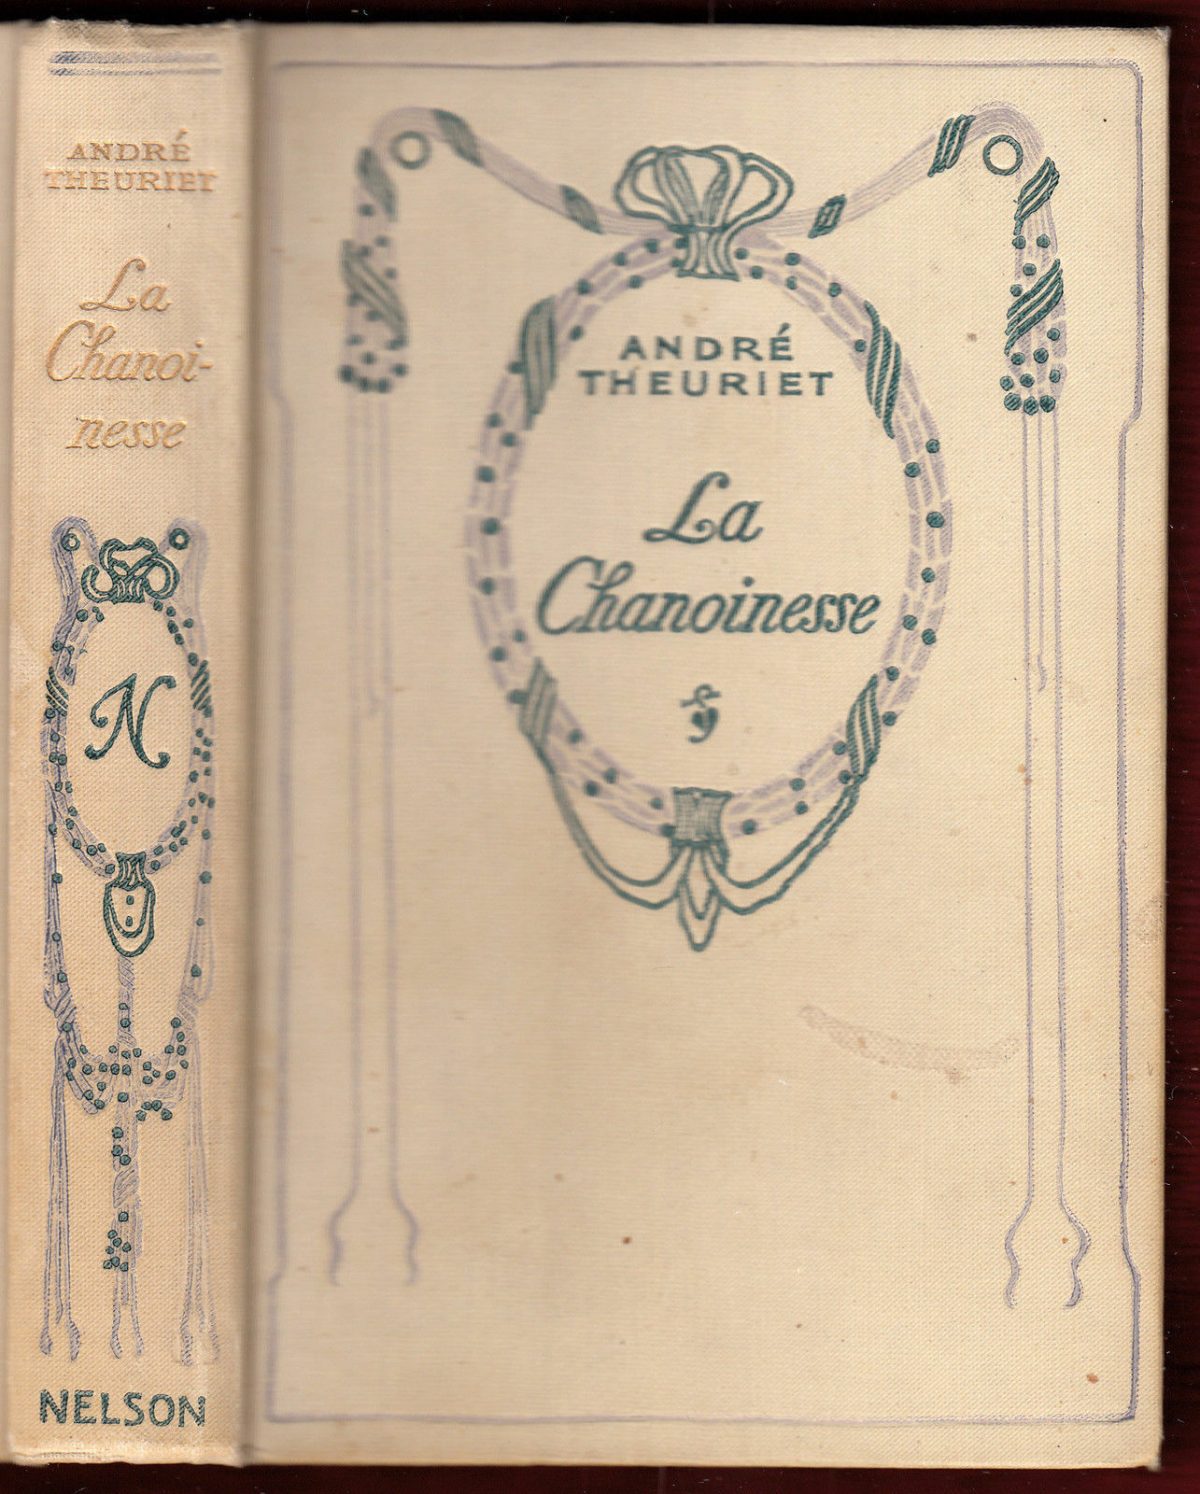 Le Chanoinesse by André Theuriet Book Cover